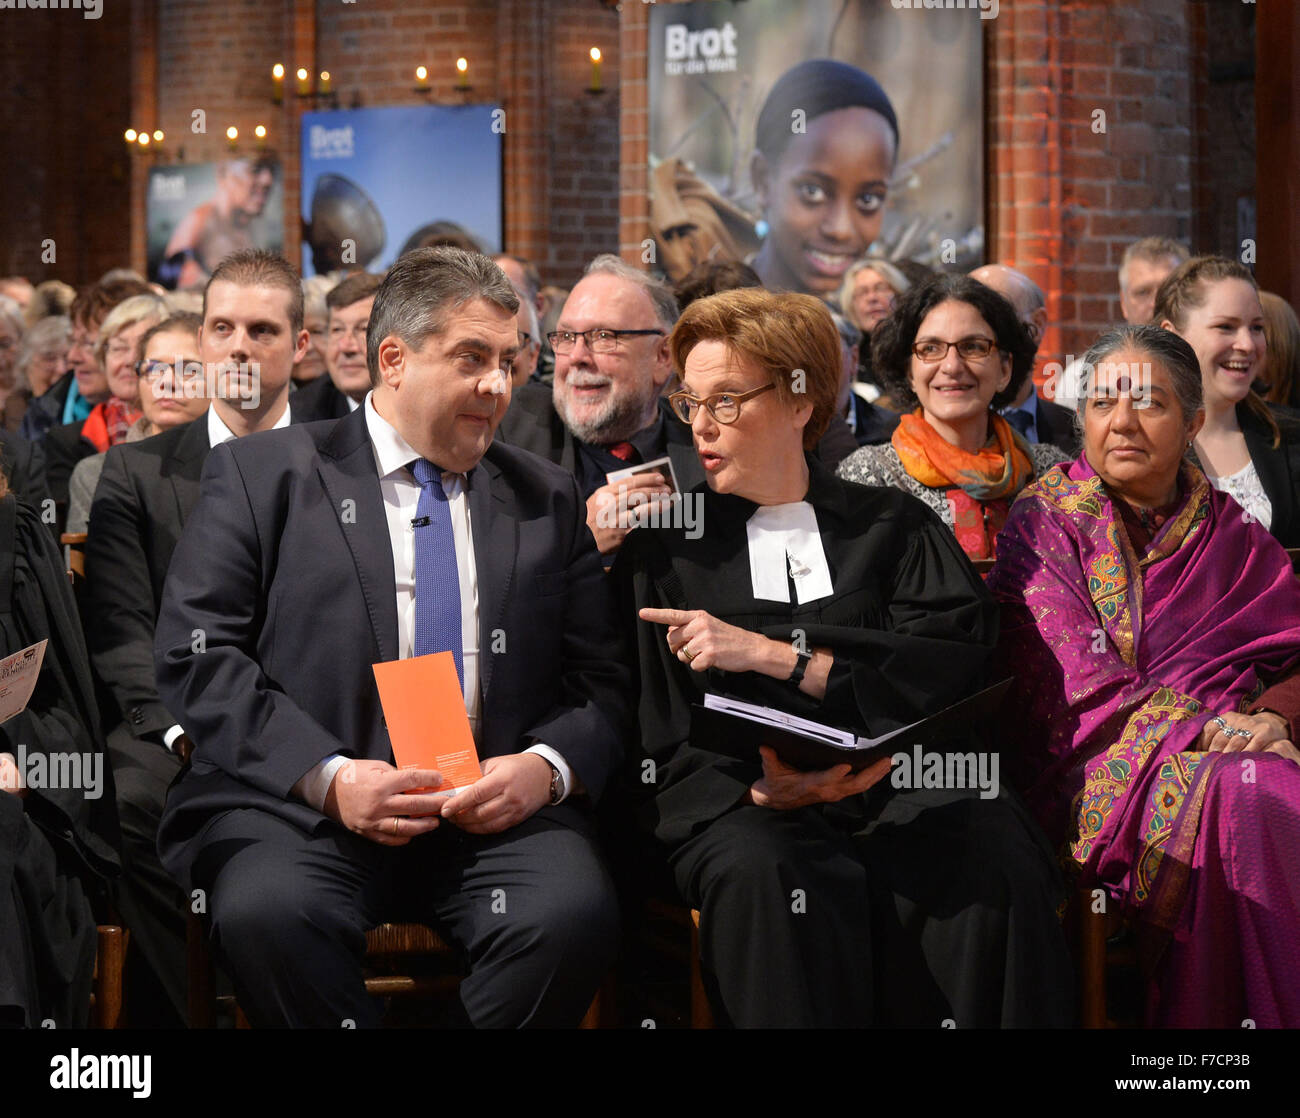 German economy minister Sigmar Gabriel (L), Cornelia Fuellkrug-Weitzel (C), president of the 'Brot fuer die Welt' (lit. Bread for the world) aid organisation, and Vandana Shiva, Indian environmental activist and winner of the Right Livelihood Award, also known as the Alternative Nobel Prize, attend the launch event of the 57th donation campaign by the evangelical aid organisation 'Bread for the world' in Hanover, Germany, 29 November 2015. Photo: JENS SCHULZE/dpa Stock Photo